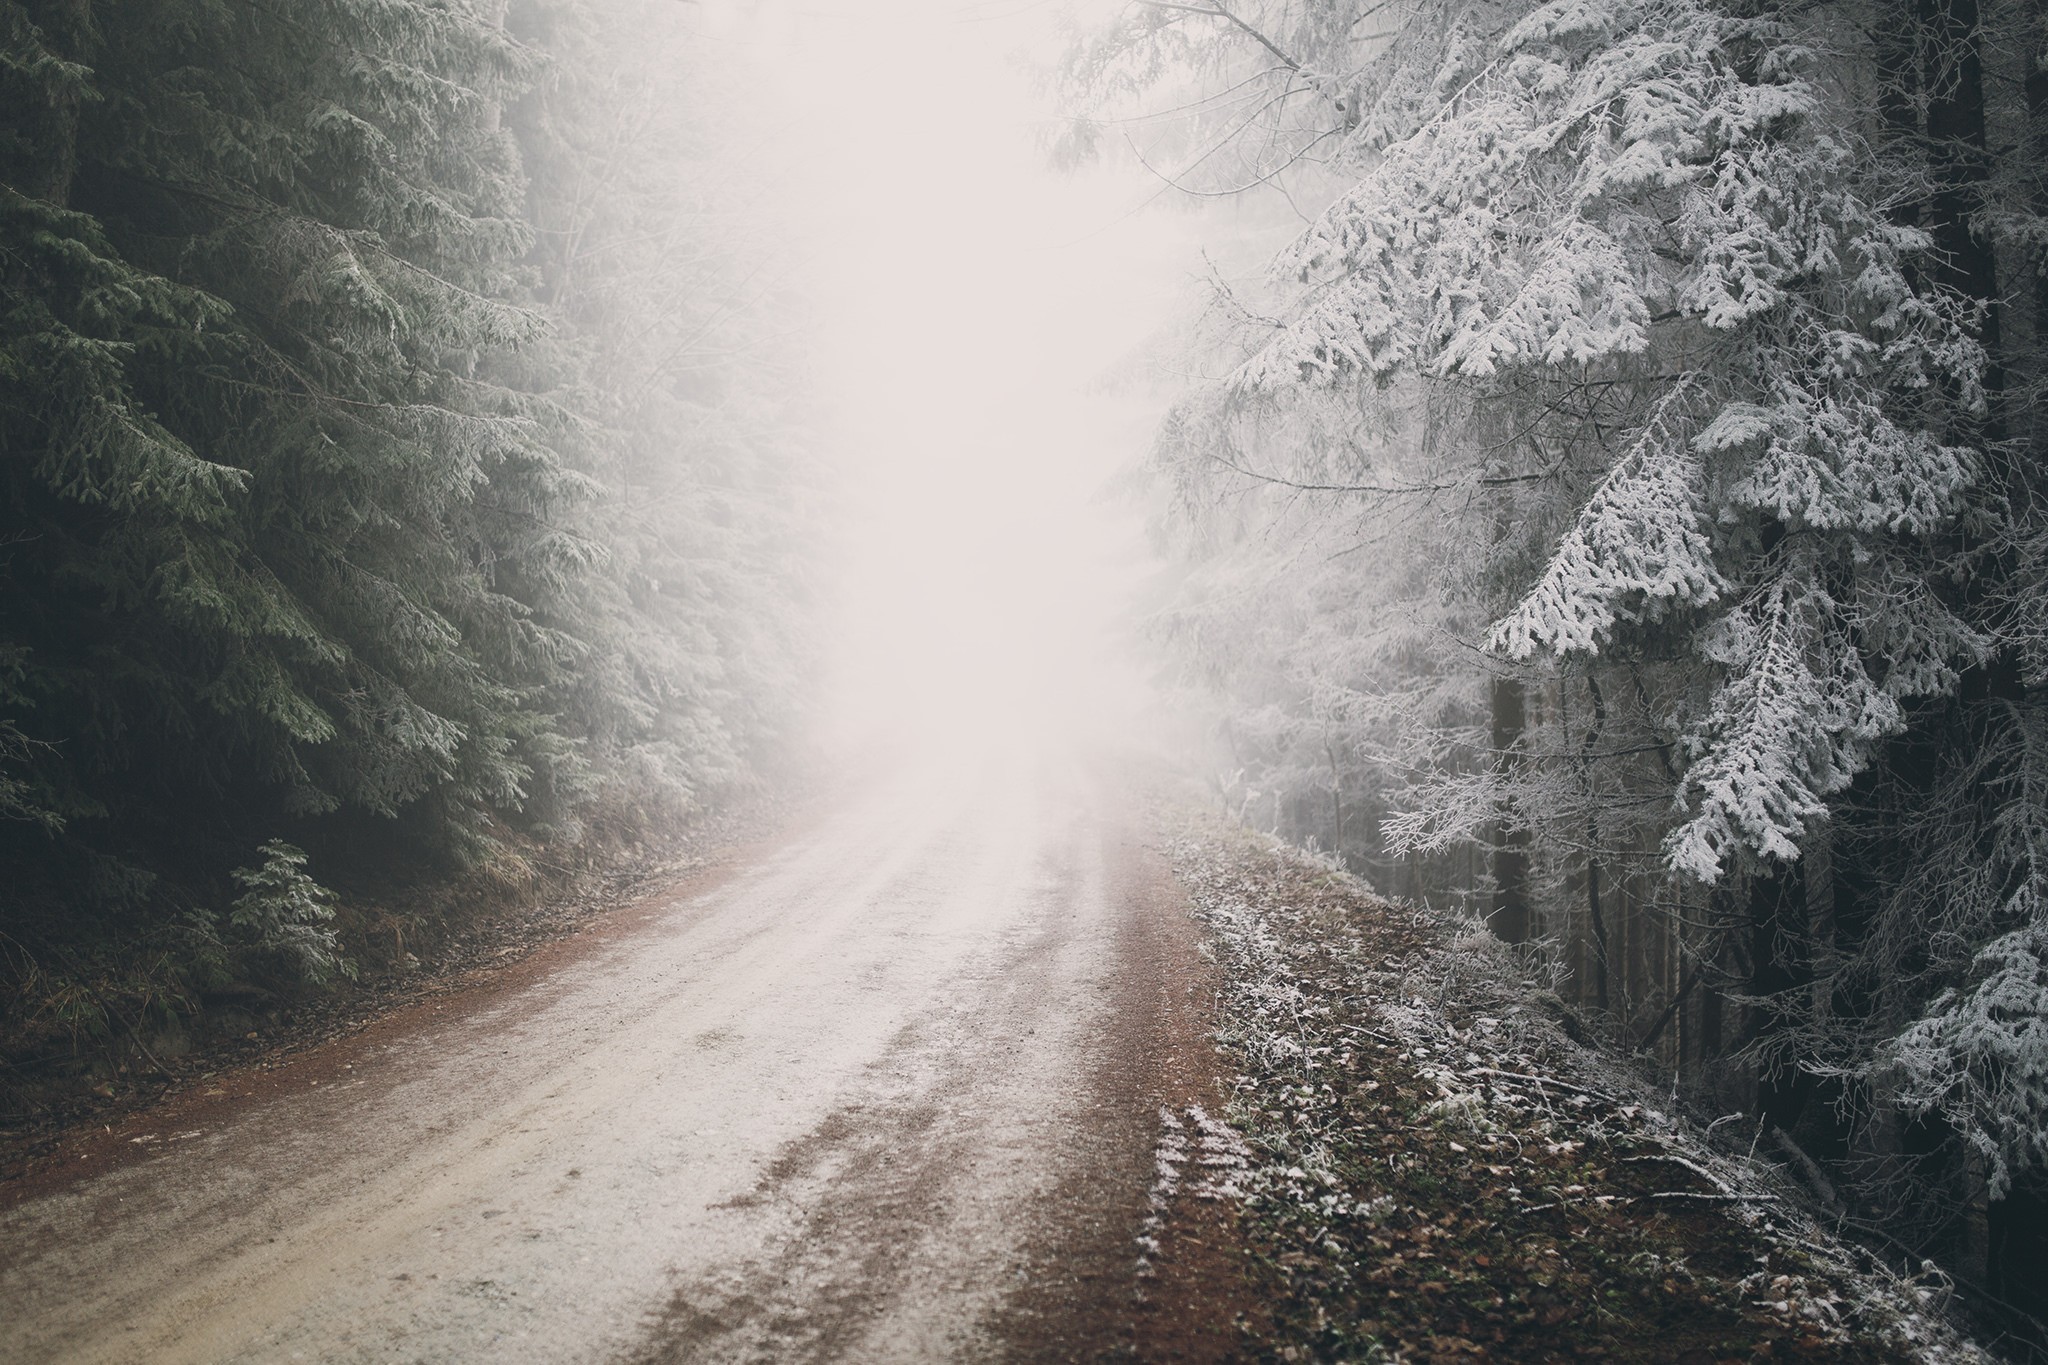 General 2048x1365 road snow mist outdoors winter cold ice